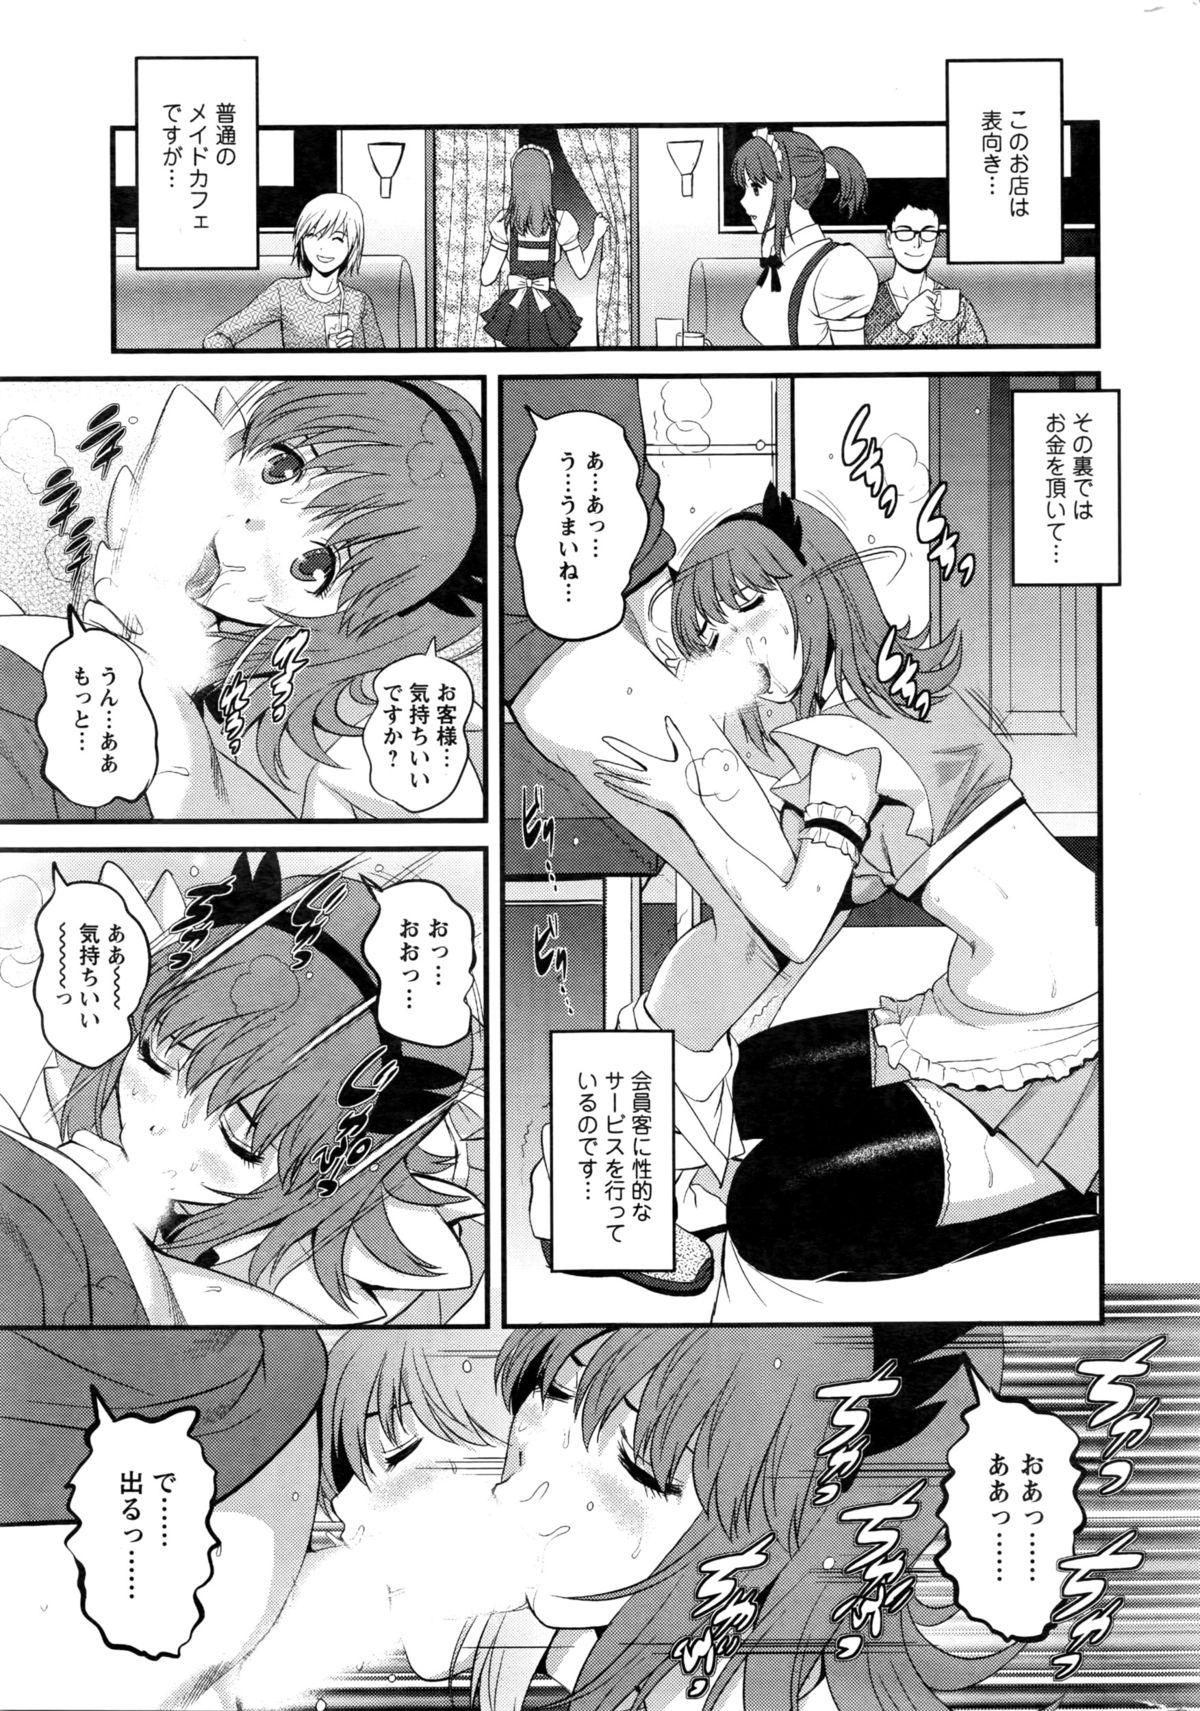 Gay Straight Boys Part time Manaka-san 2nd Ch. 1 Stream - Page 7